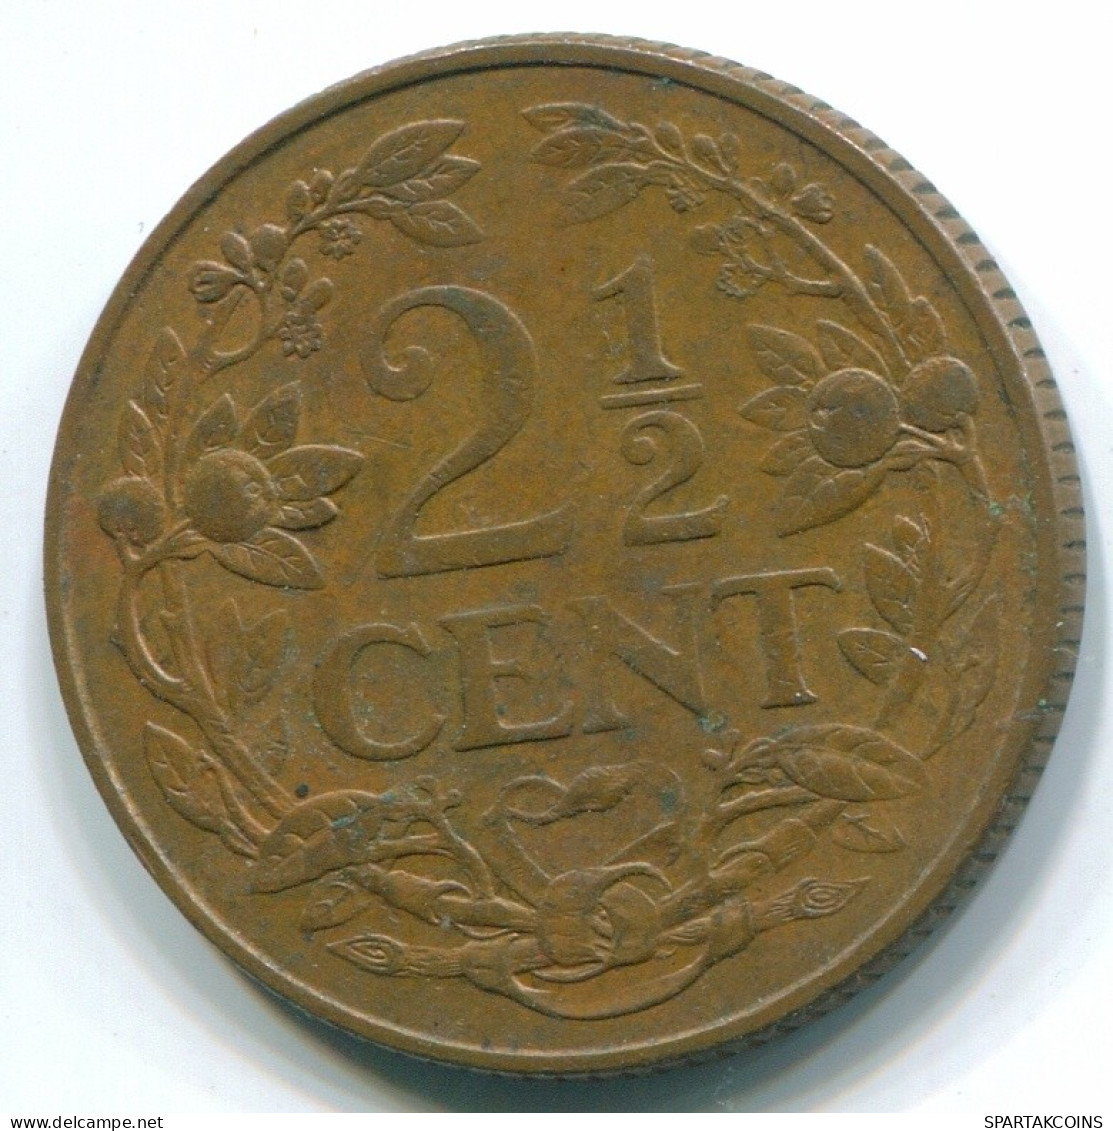 2 1/2 CENT 1965 CURACAO Netherlands Bronze Colonial Coin #S10214.U.A - Curacao